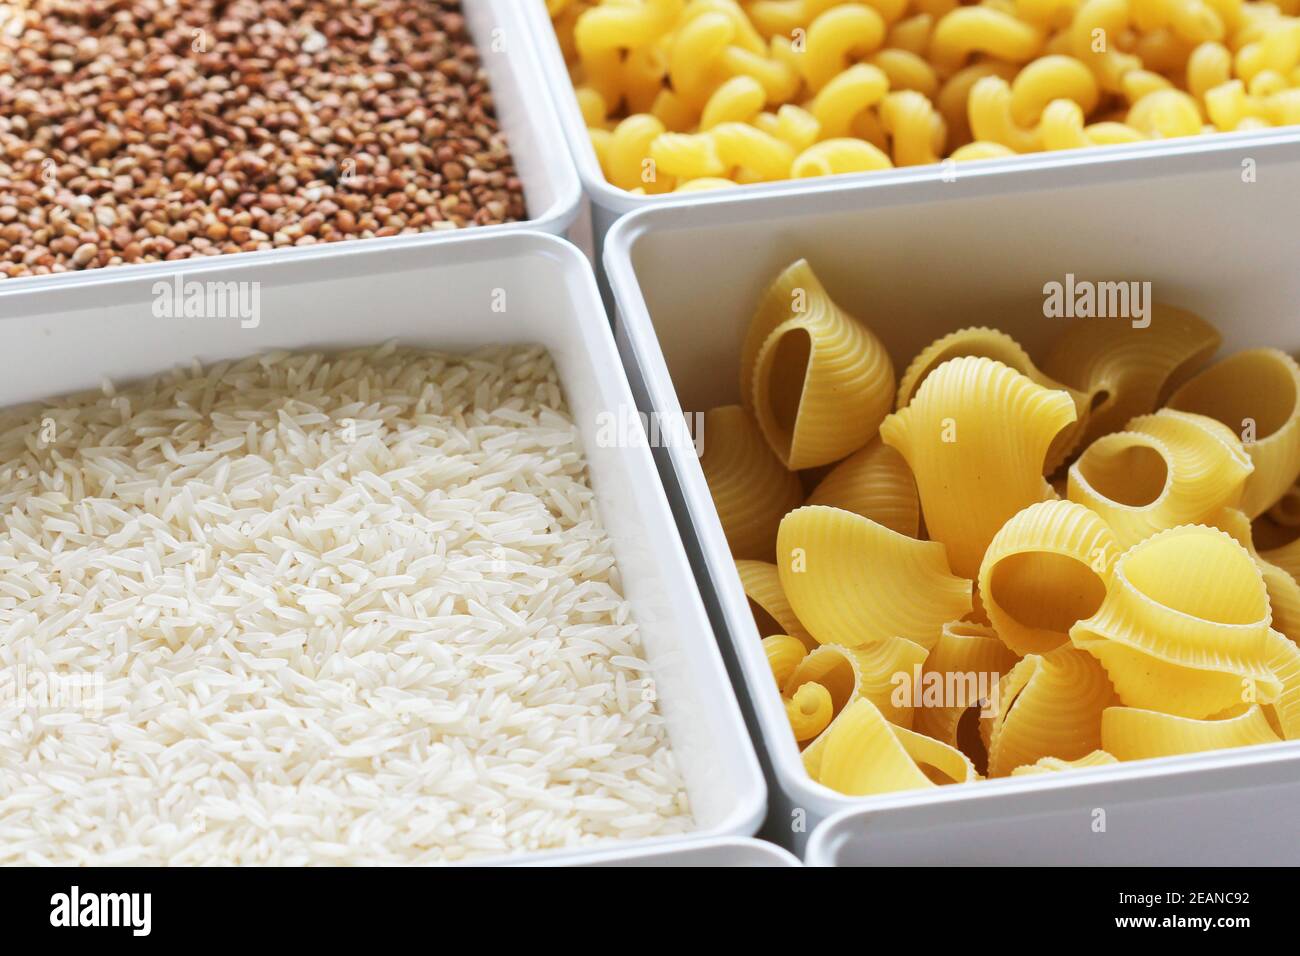 Rice, noodles, oats and buckwheat in a box. Food supplies Stock Photo